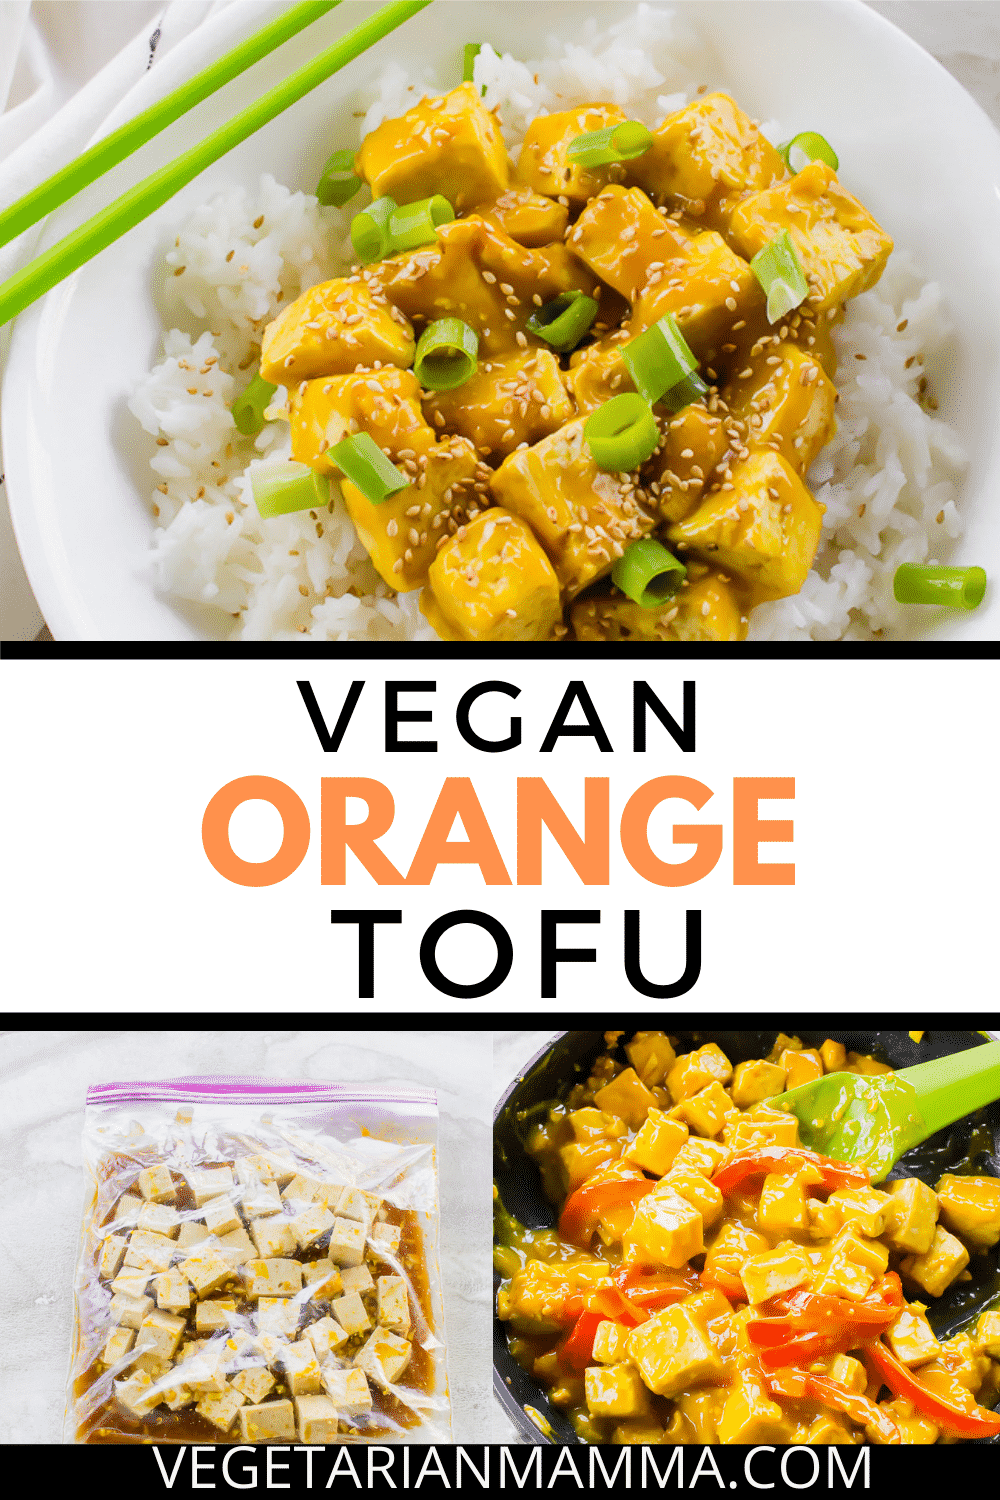 Orange Tofu is a delicious and easy tofu recipe that your entire family will love! This crispy orange tofu recipe is flavored with fresh squeezed orange juice, soy sauce, and served over rice. #orangetofu #orangechicken #veganorangechicken